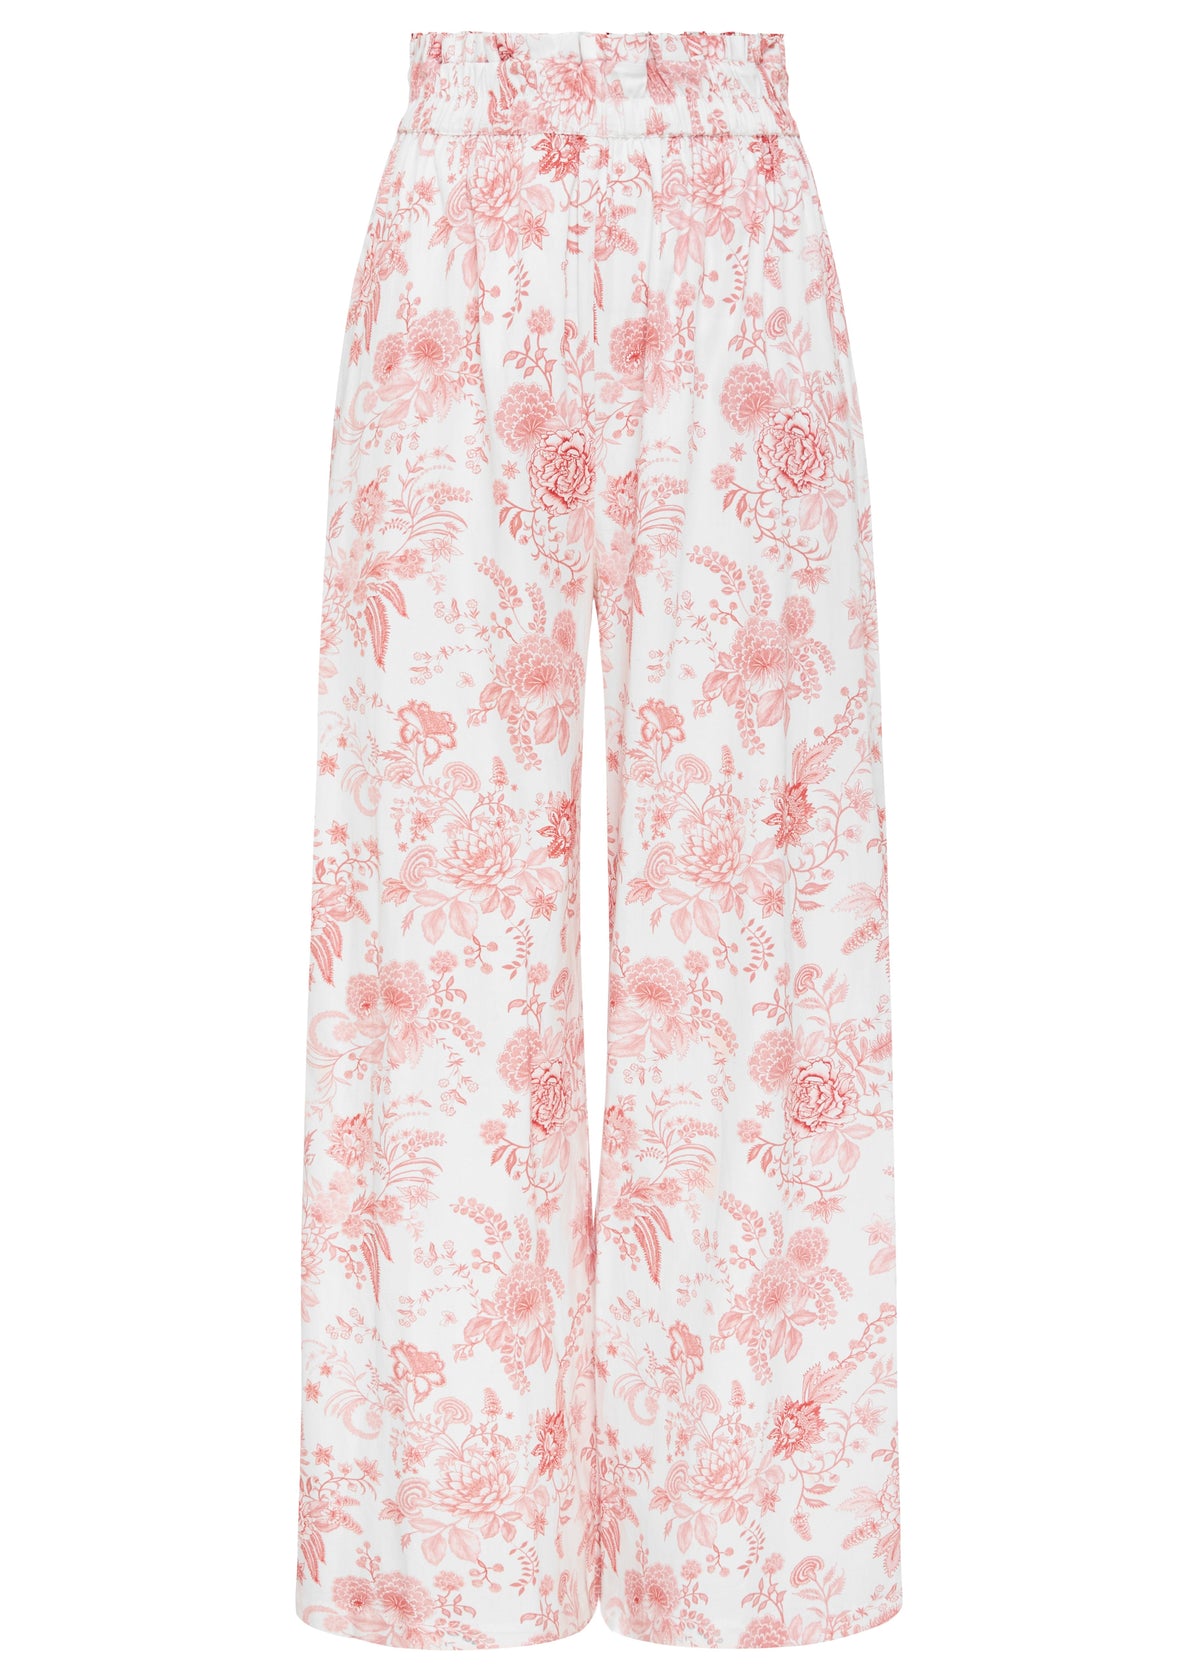 pink floral print organic cotton pants for summer